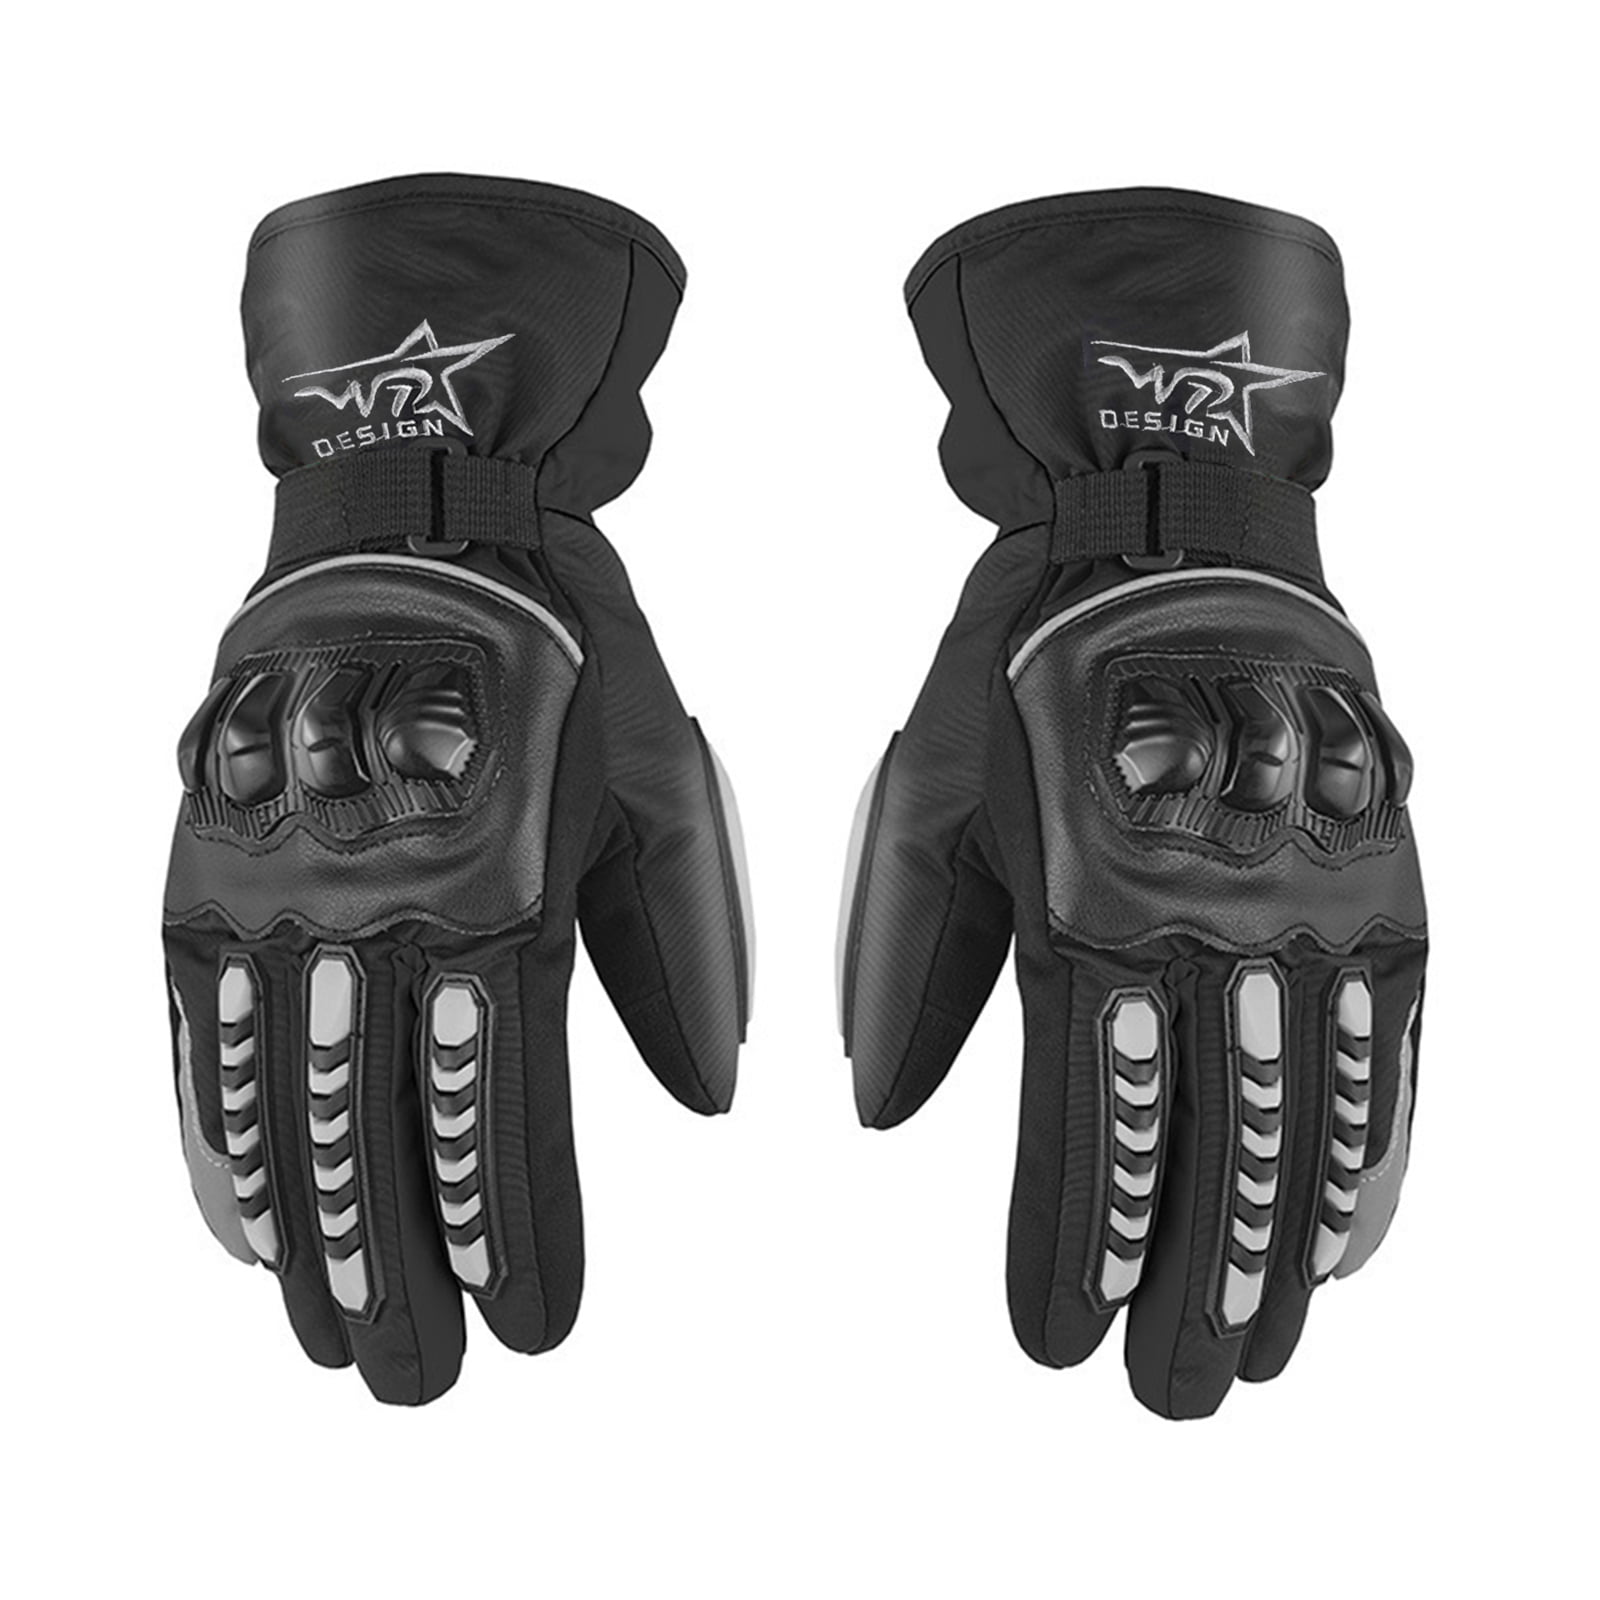 1 Pair Moto Winter Thermal Gloves Windproof Warm Motorcycle Riding Racing Sports 